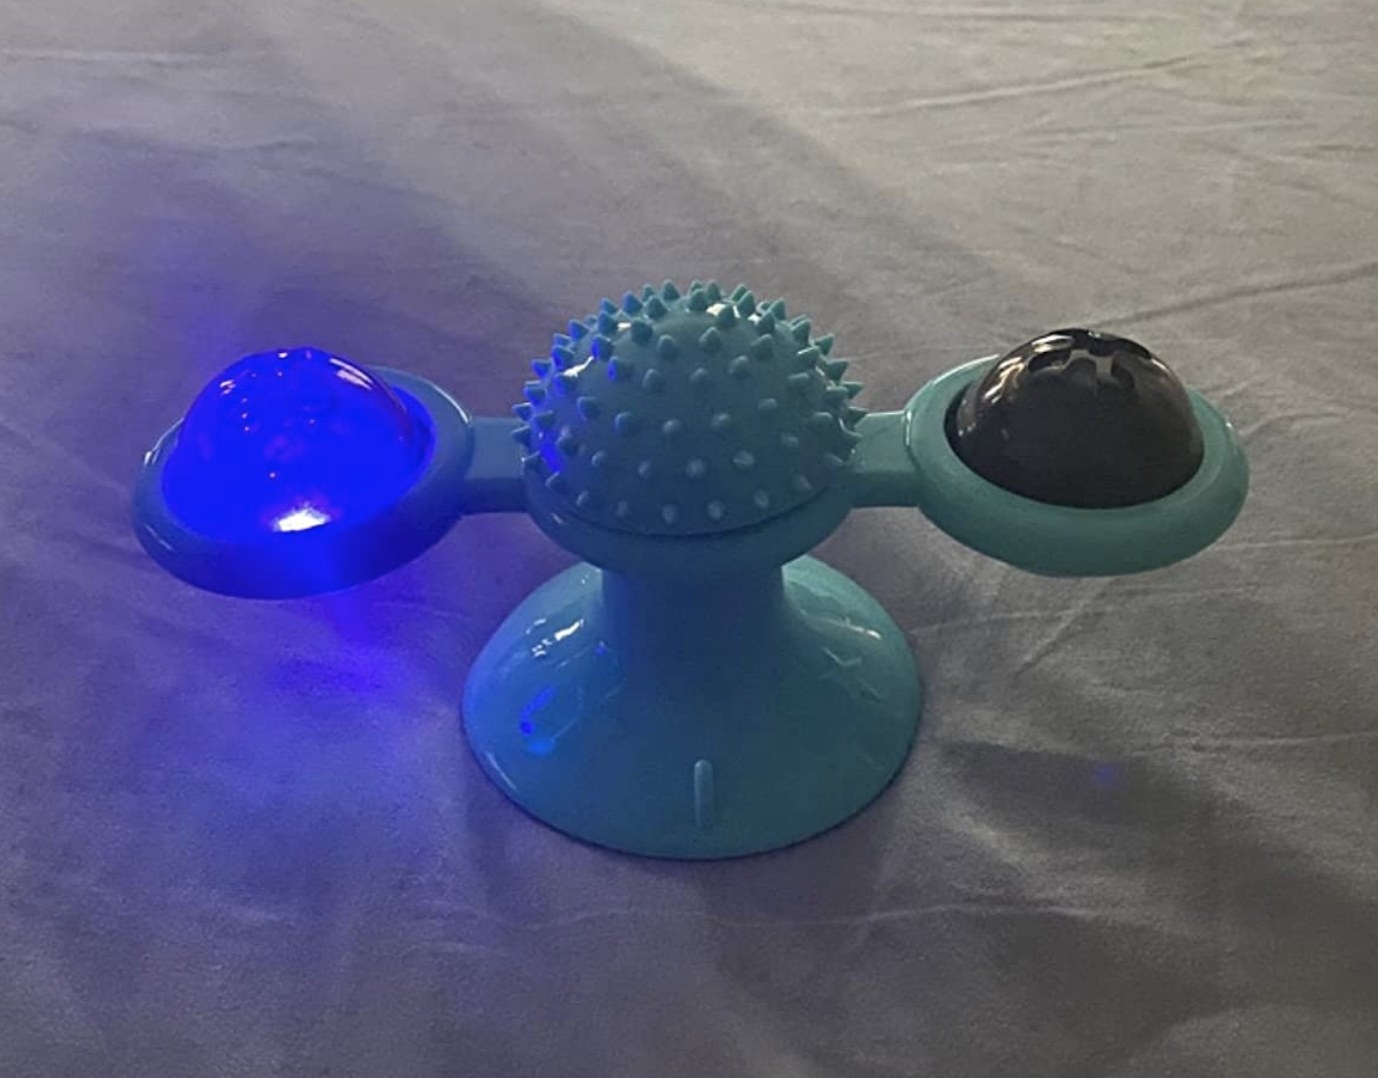 a turquoise spinning toy with a spiked center, with two rotating LED balls (one of which is lit blue)